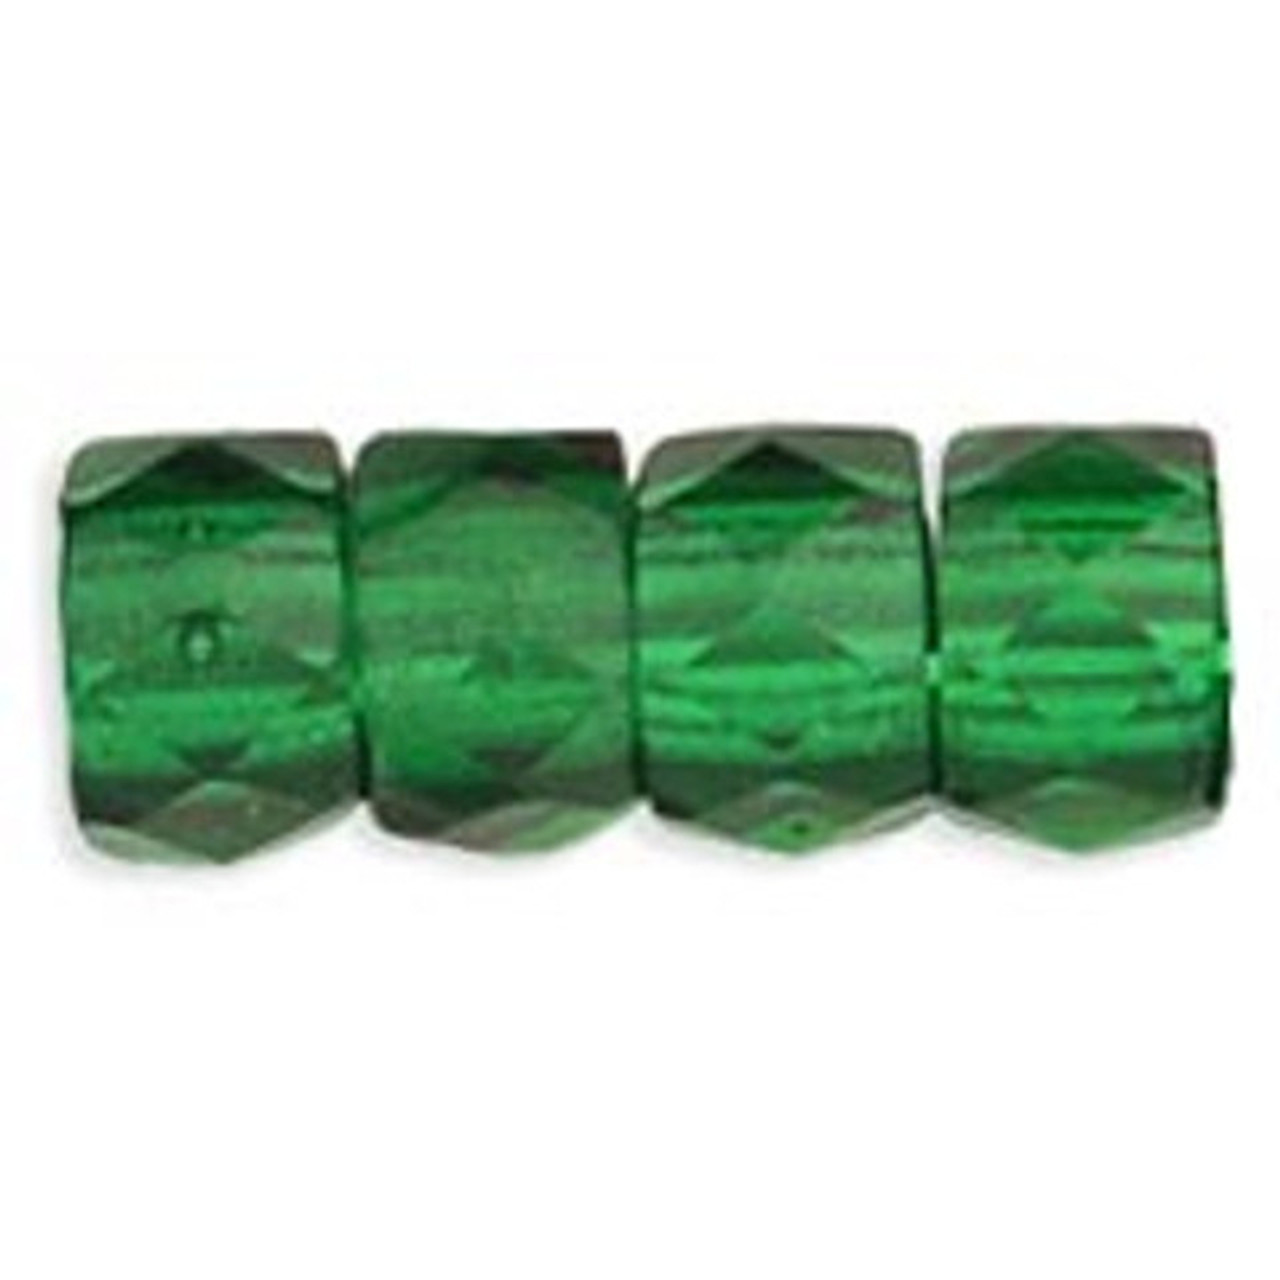 Faceted Large Hole Crow Beads GREEN EMERALD 6x4mm Czech Glass (Strand of 25)